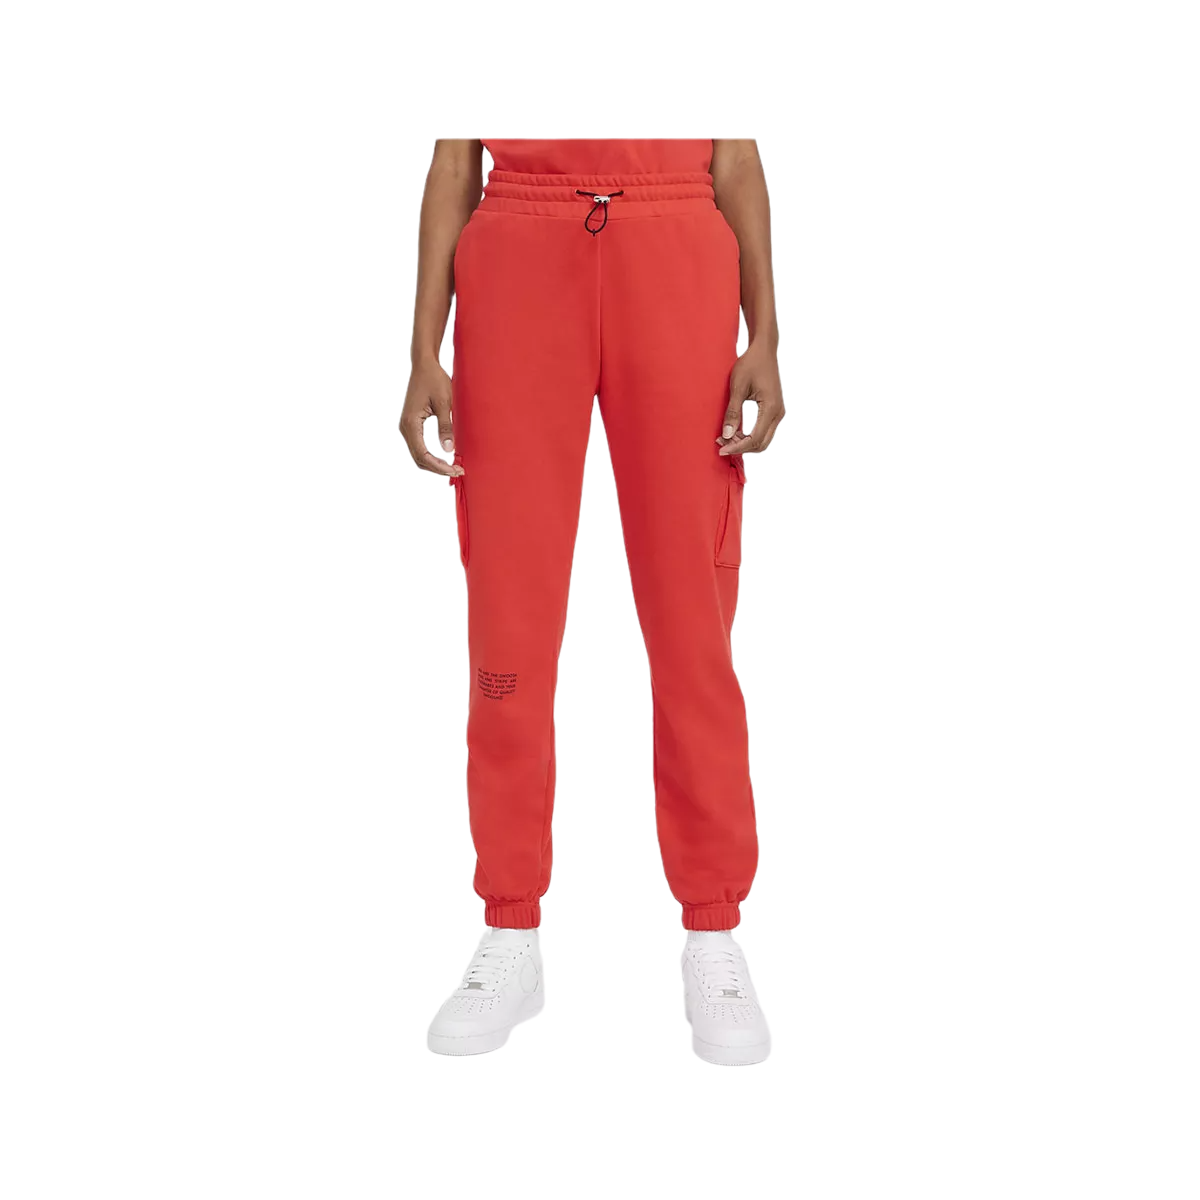 Nike Women's Swoosh French Terry Trousers